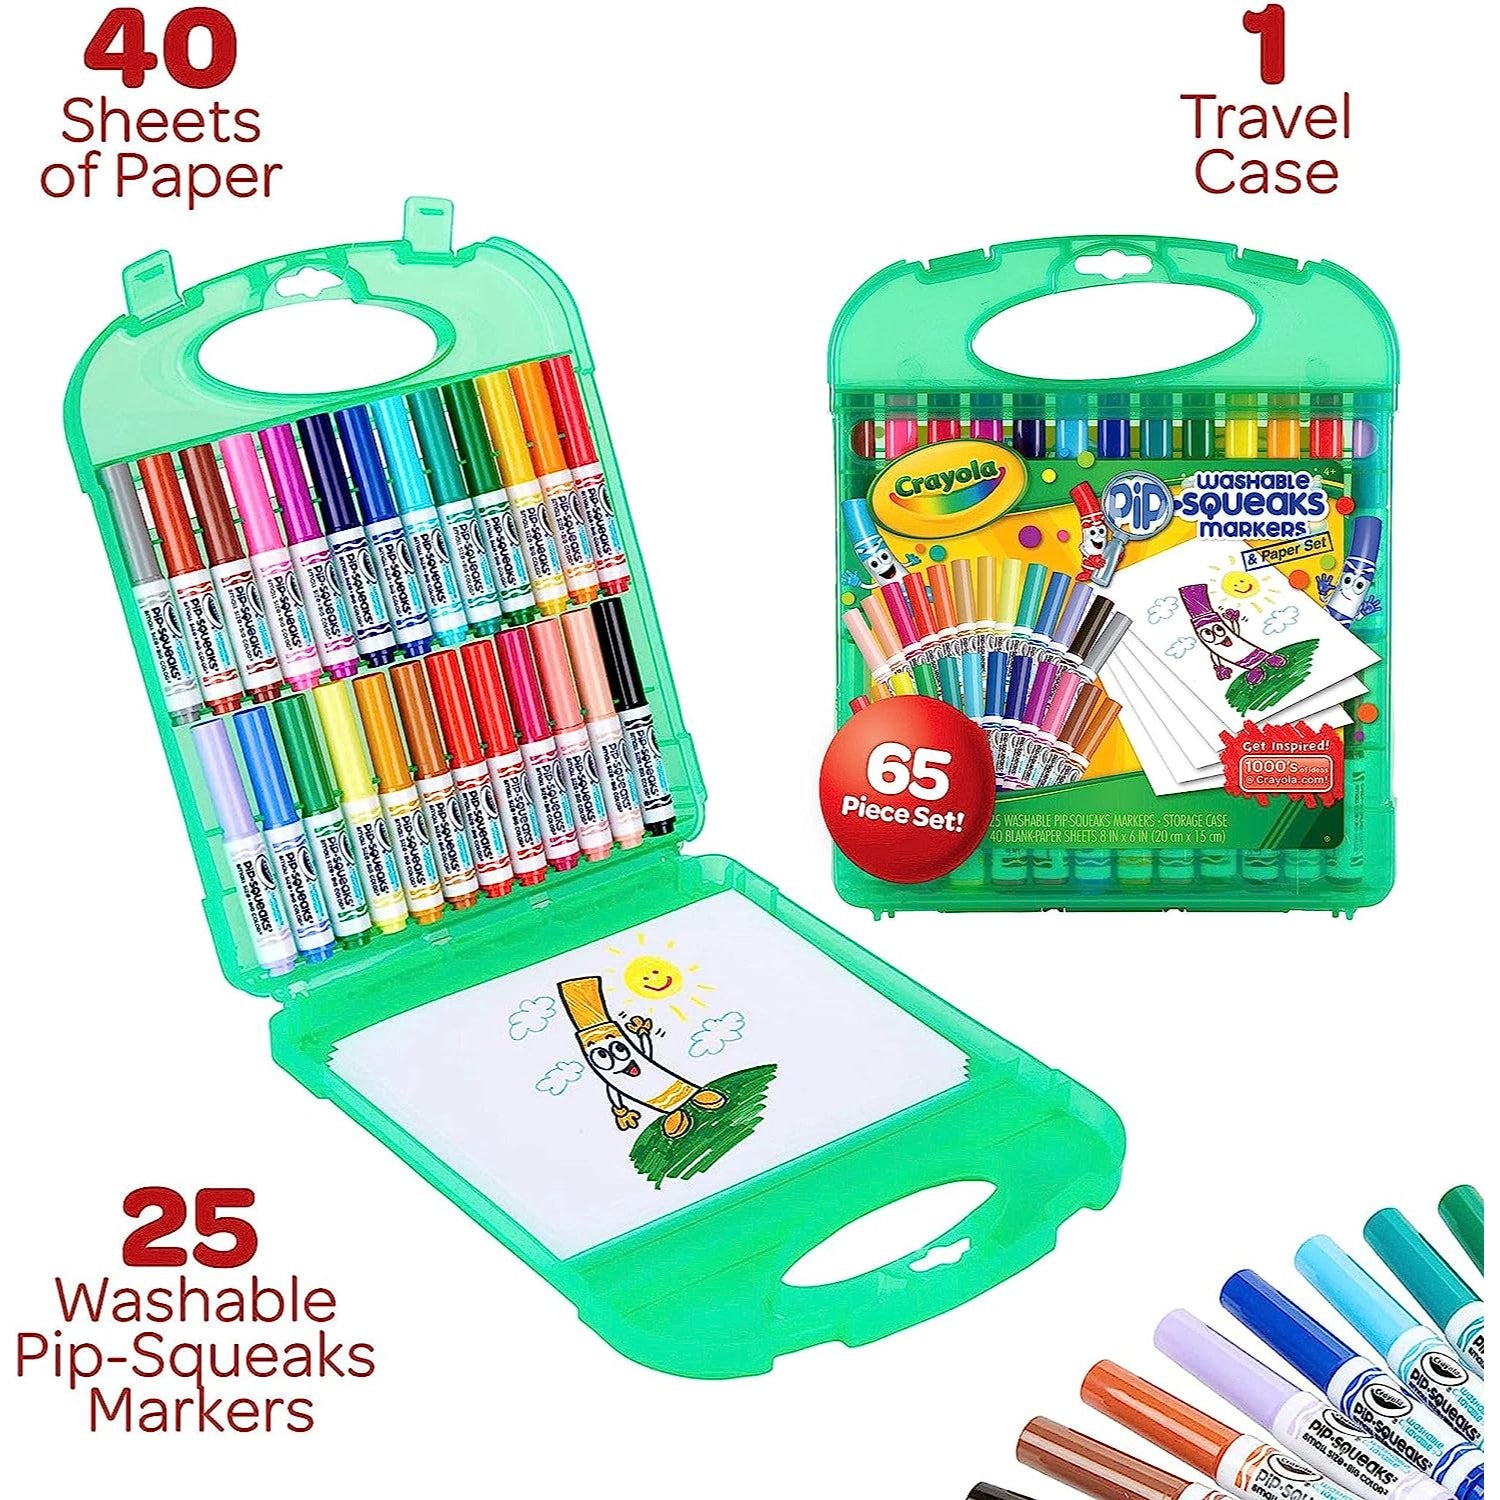 Crayola Twistables Colored Pencils Set (65Ct), Kids Drawing Kit